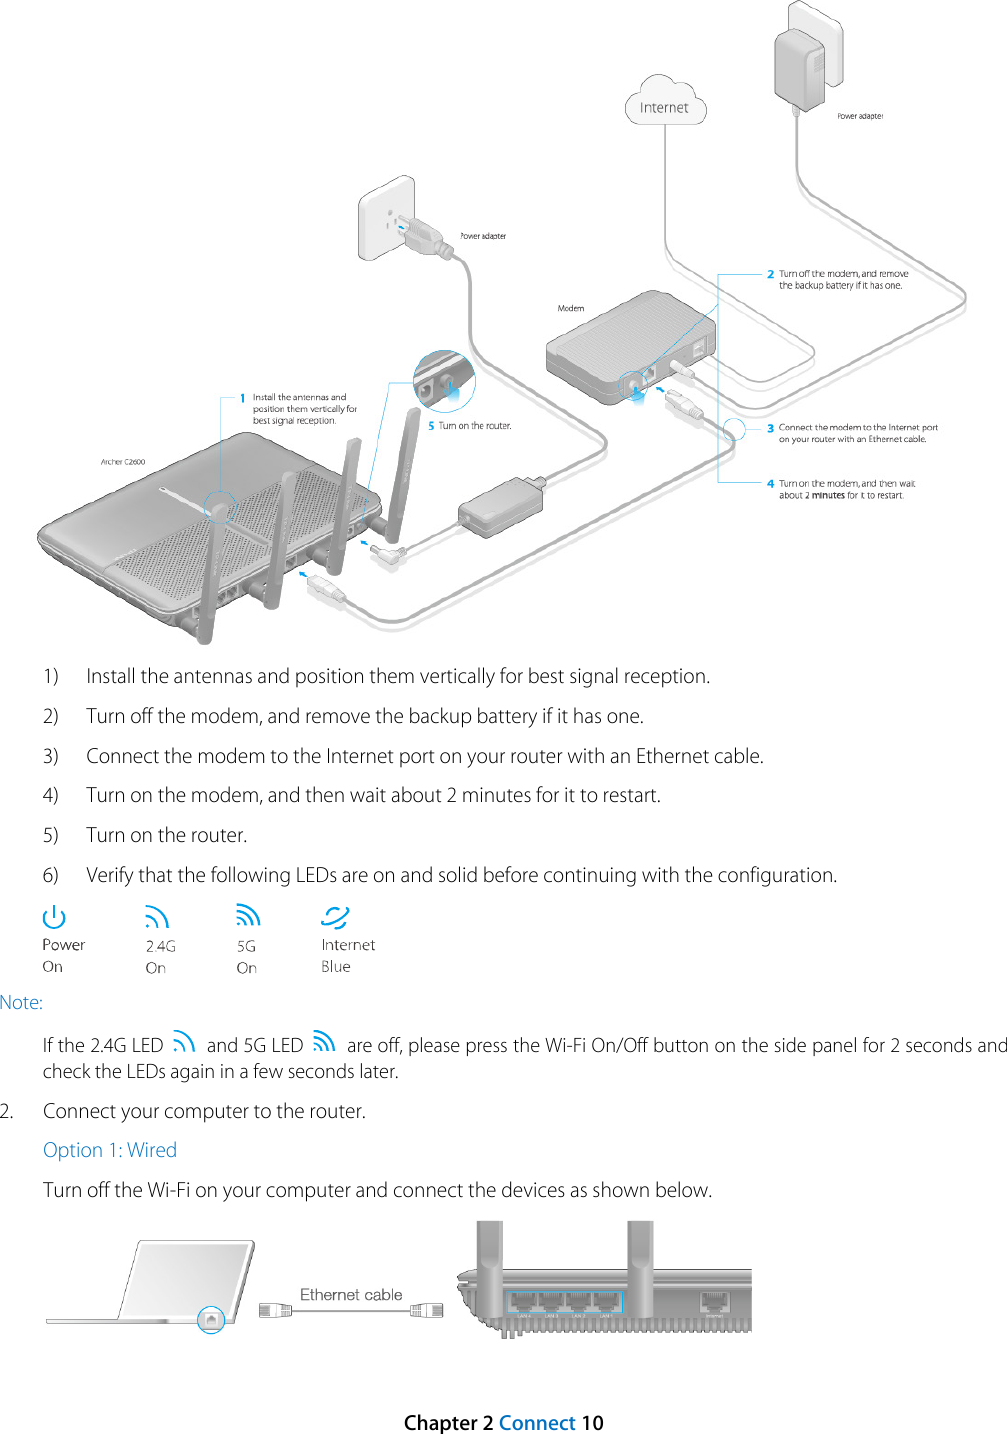   1) Install the antennas and position them vertically for best signal reception. 2) Turn off the modem, and remove the backup battery if it has one. 3) Connect the modem to the Internet port on your router with an Ethernet cable. 4) Turn on the modem, and then wait about 2 minutes for it to restart. 5) Turn on the router. 6) Verify that the following LEDs are on and solid before continuing with the configuration.  Note: If the 2.4G LED   and 5G LED   are off, please press the Wi-Fi On/Off button on the side panel for 2 seconds and check the LEDs again in a few seconds later. 2. Connect your computer to the router. Option 1: Wired Turn off the Wi-Fi on your computer and connect the devices as shown below.  Chapter 2 Connect 10 